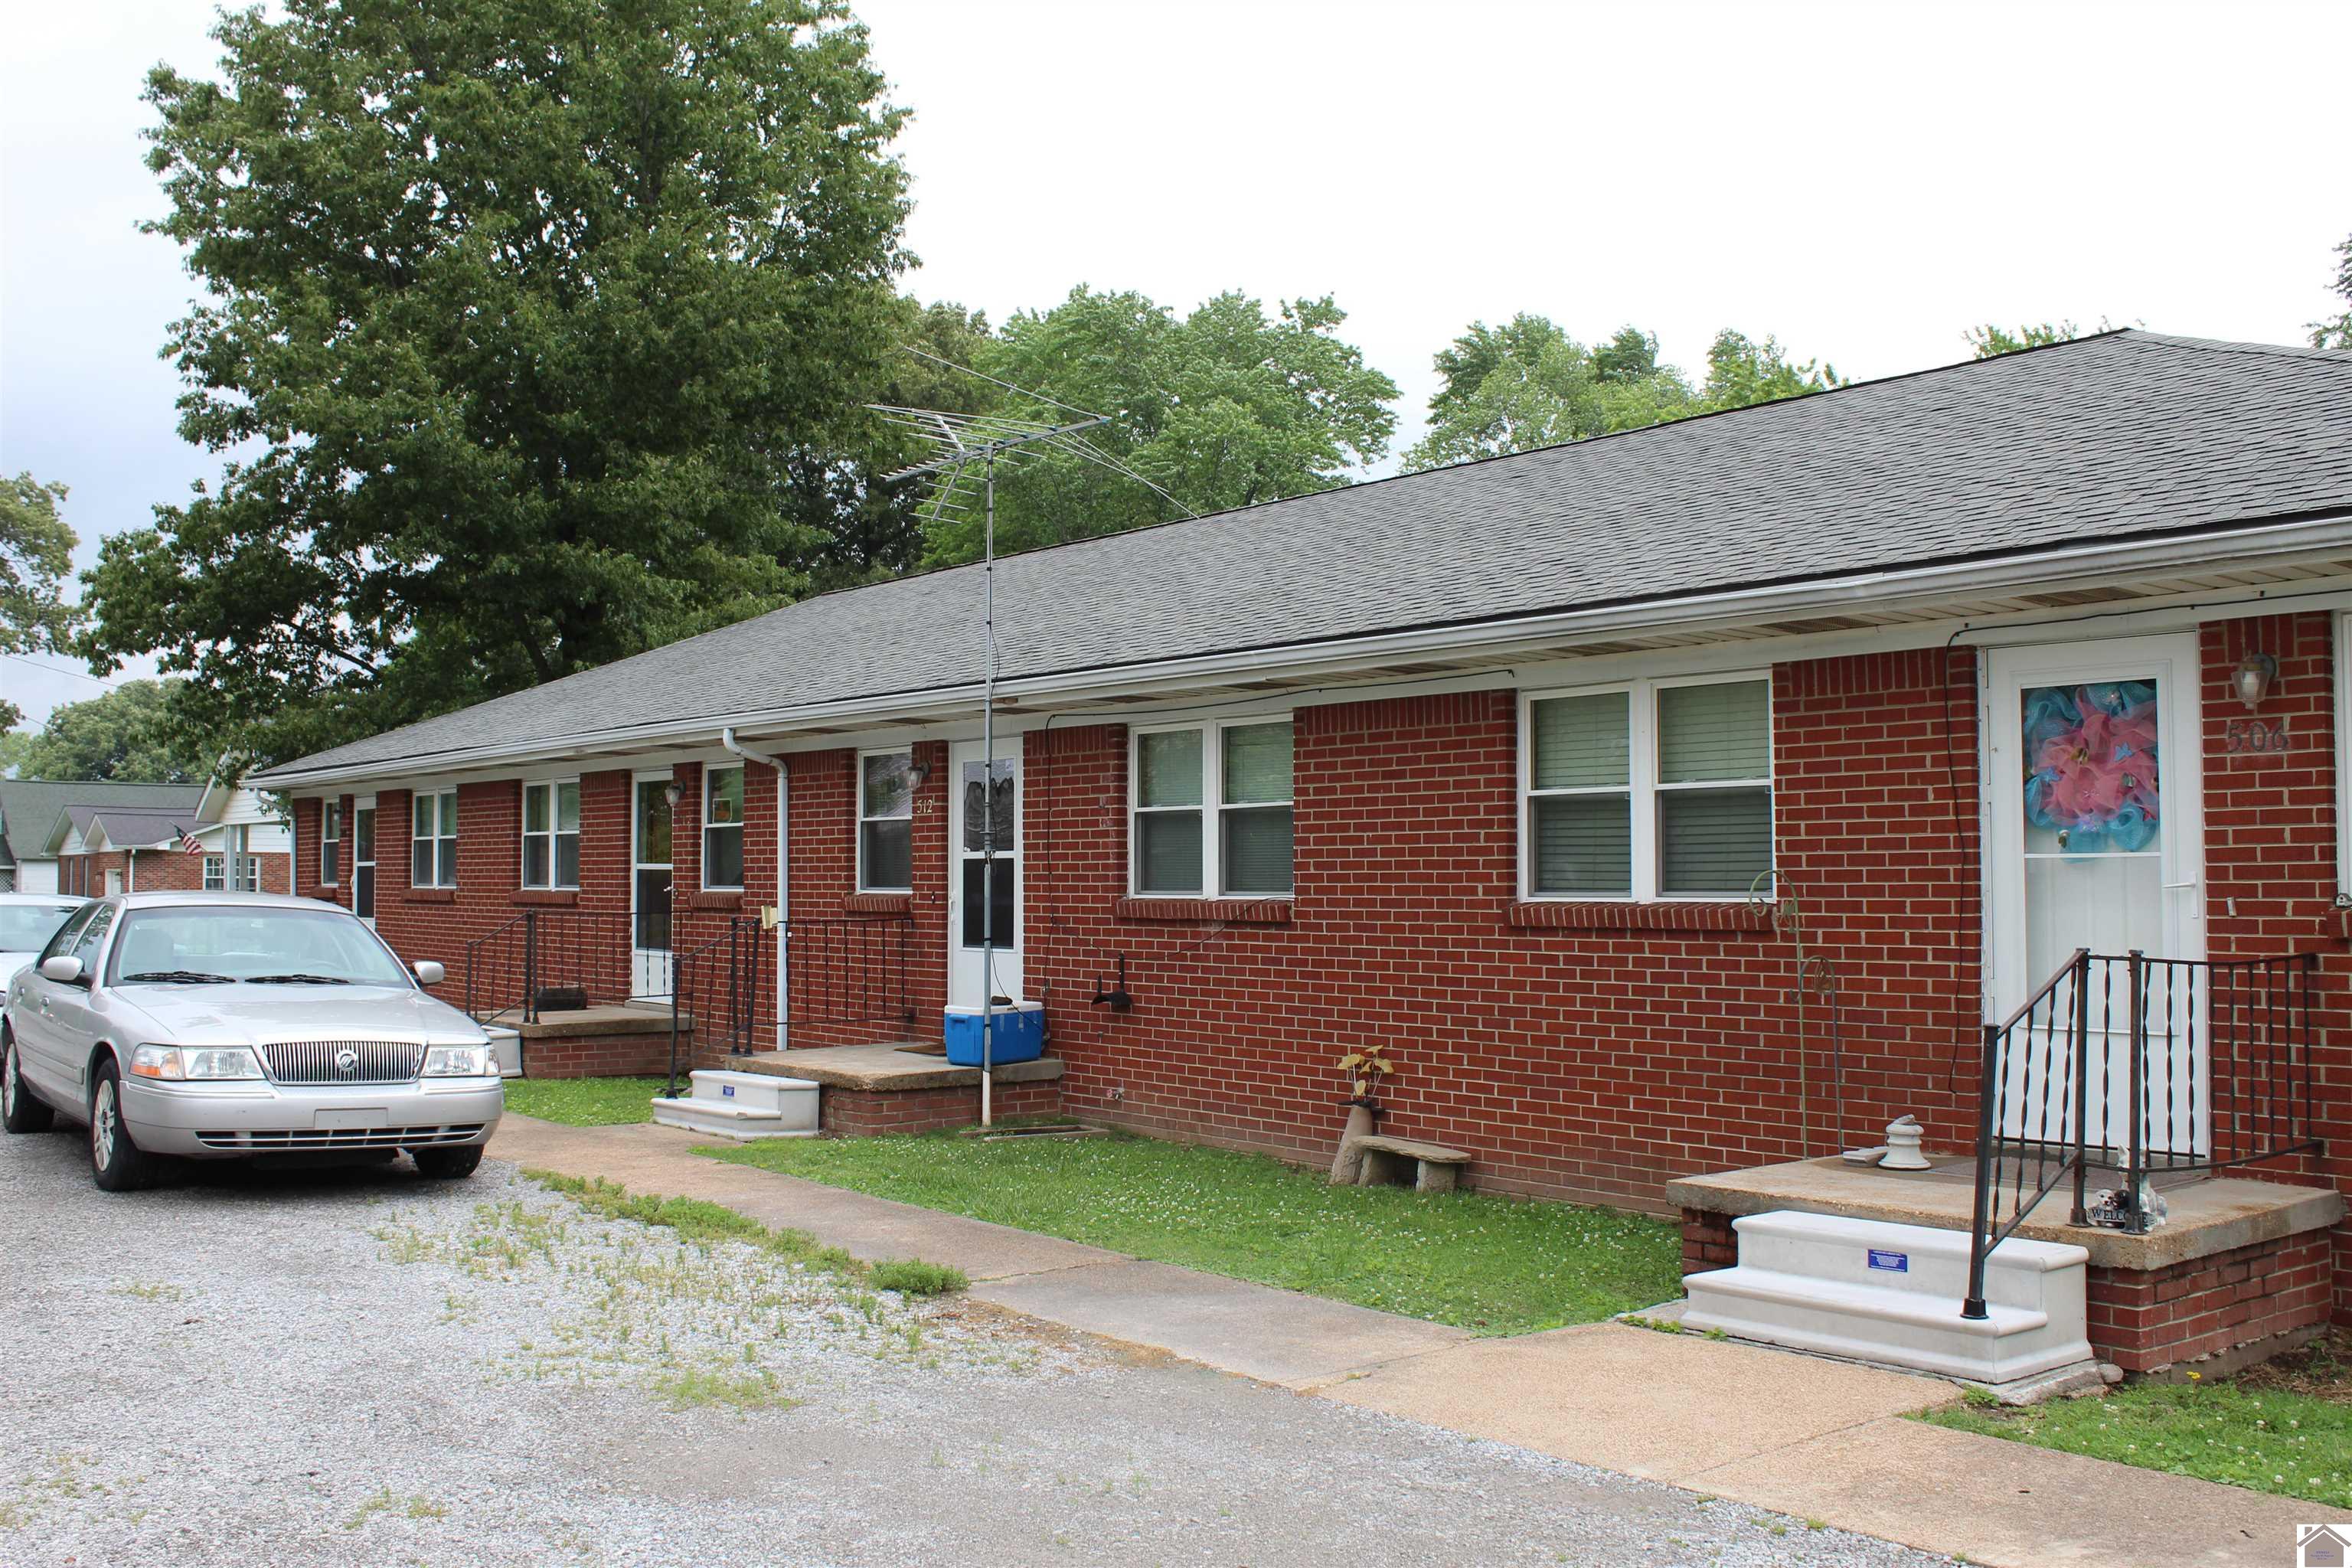 106-130 East 5th, LaCenter, KY 42056 Listing Photo  7